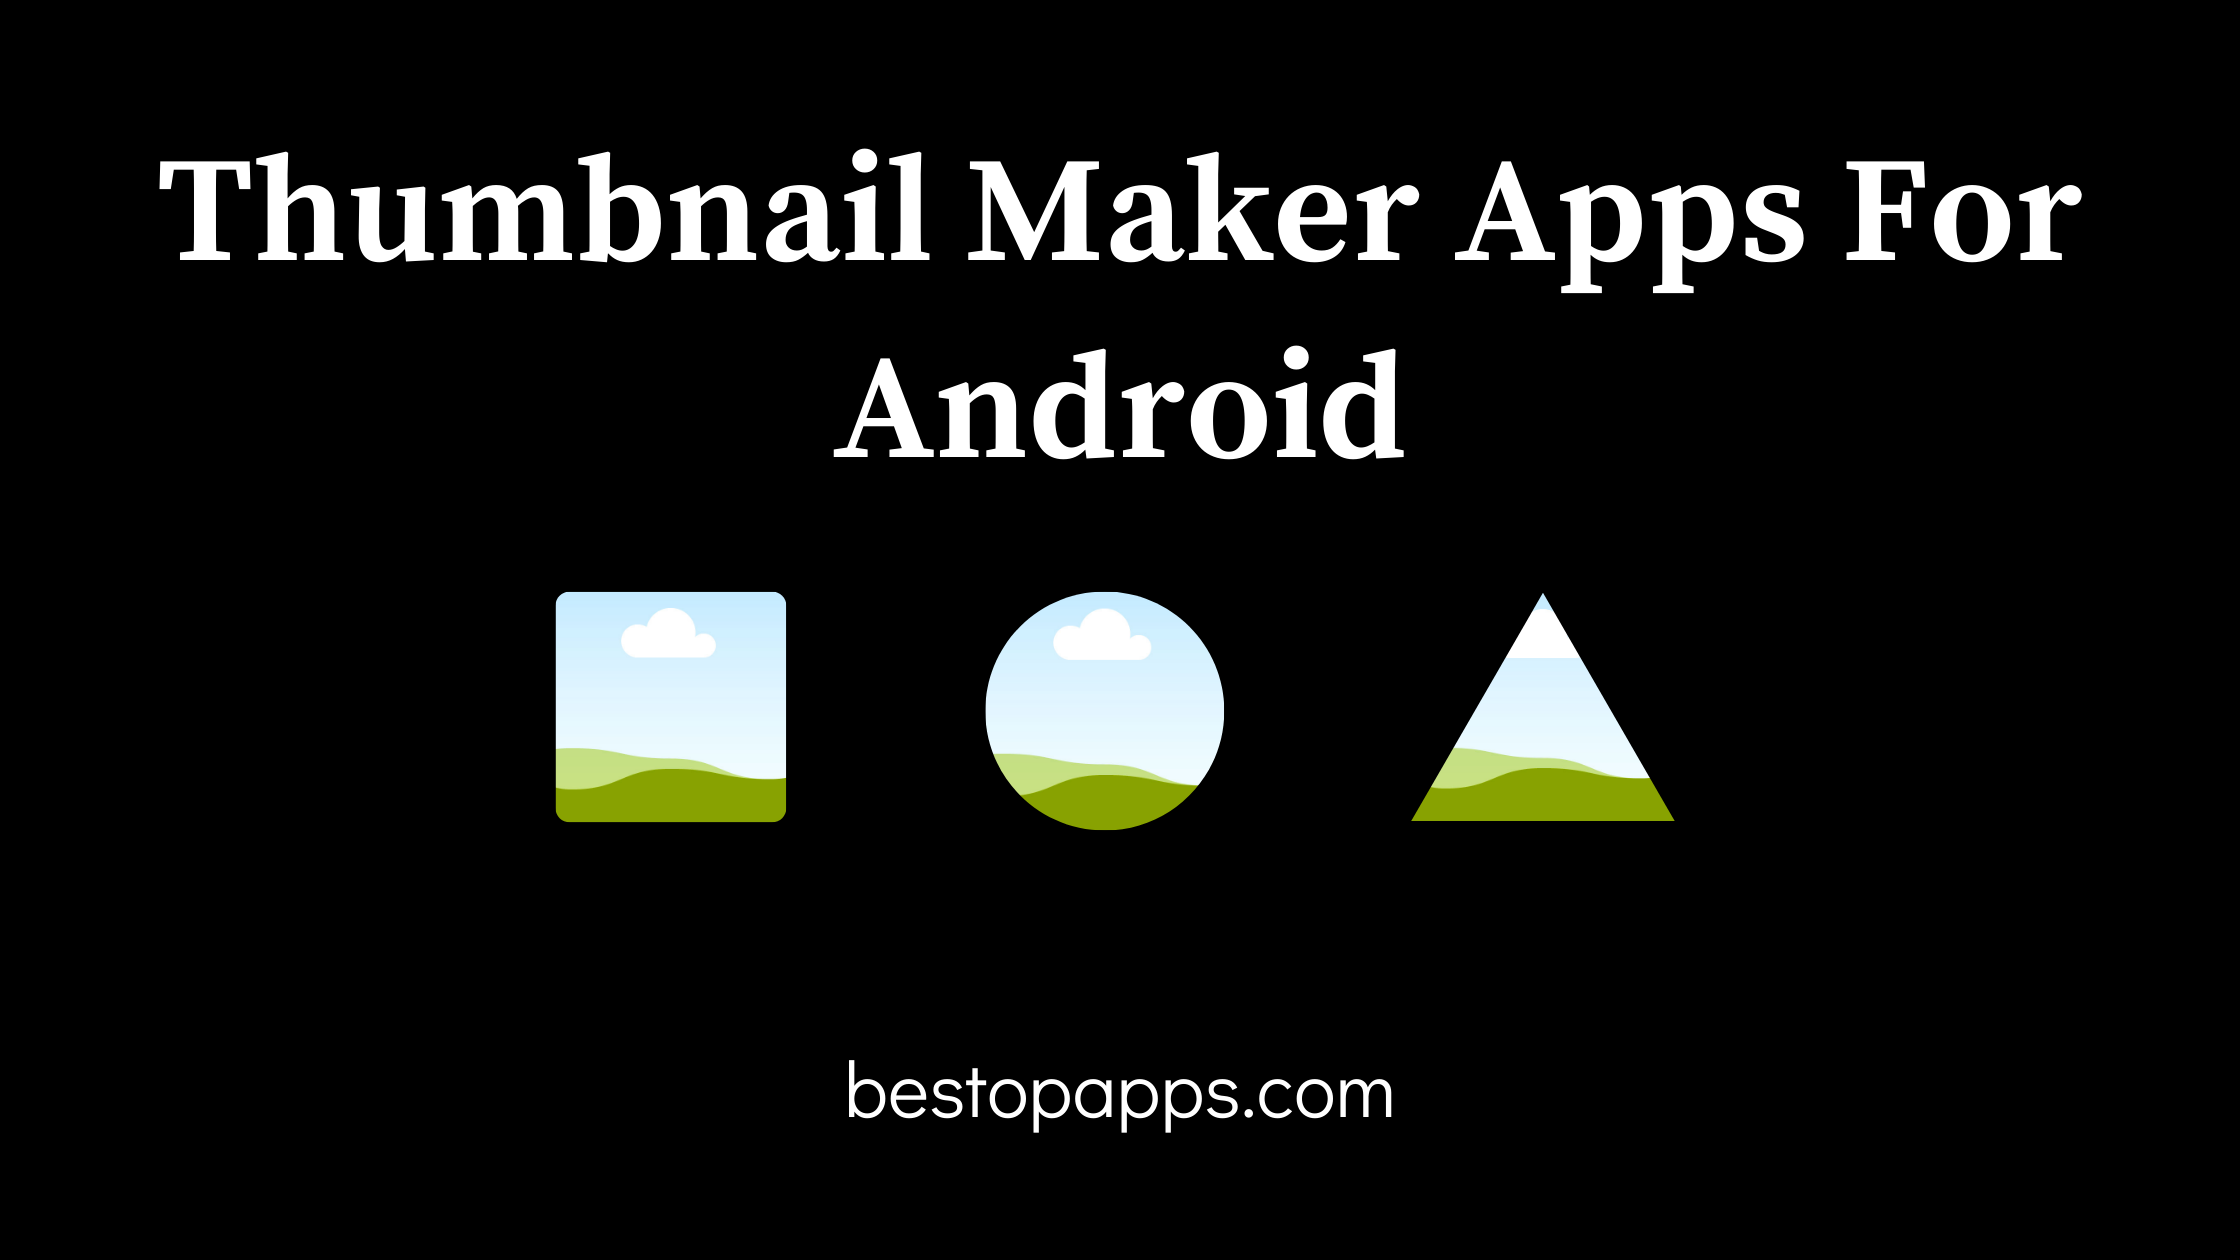 Thumbnail Maker Apps For Android